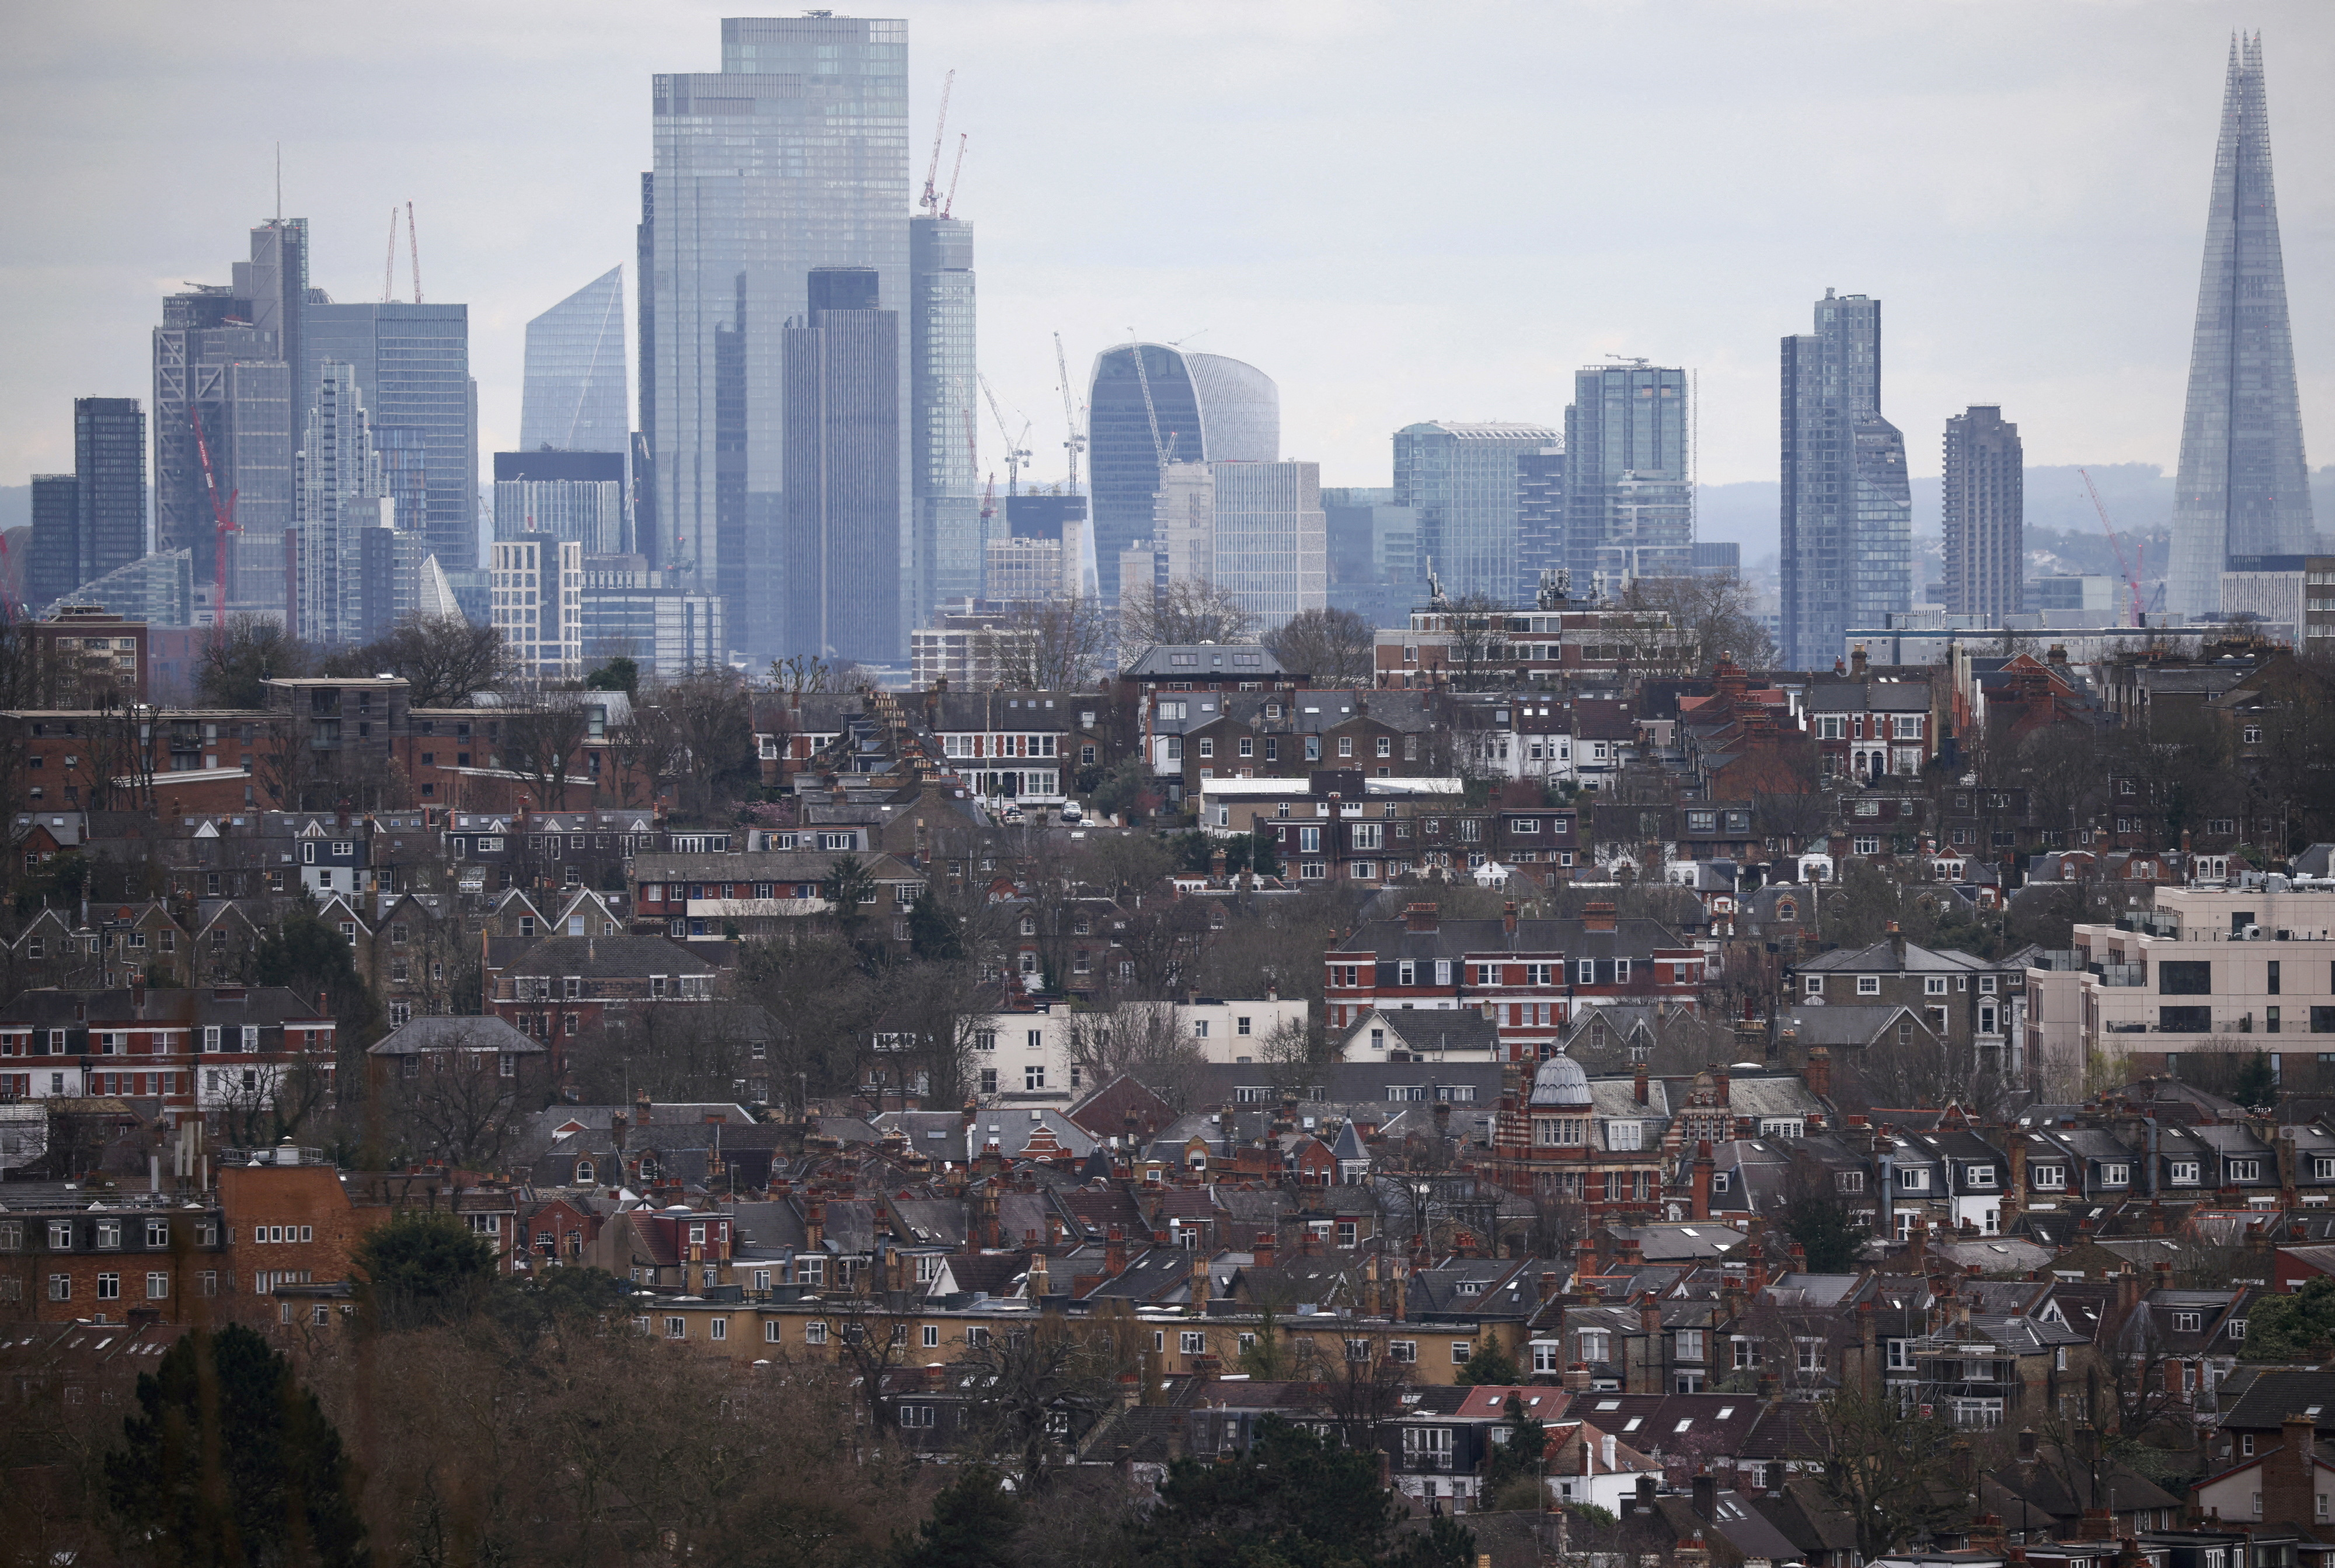 Rows of houses lie in front of the City of London skyline in London